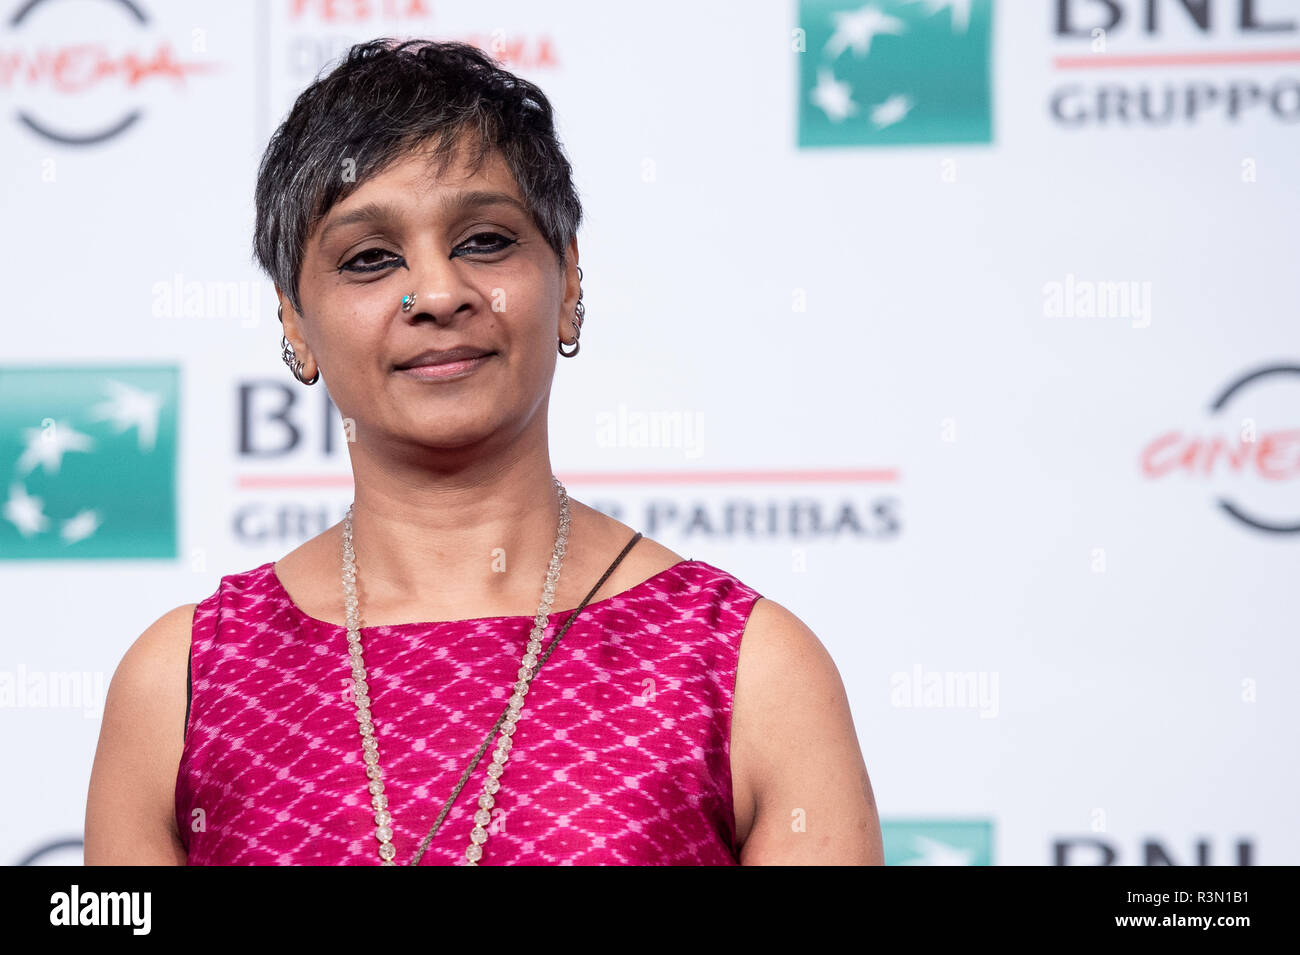 13th Rome Film Fest - 'My Dear Prime Minister' - Photocall  Featuring: Bharathi Mehra Where: Rome, Italy When: 23 Oct 2018 Credit: WENN.com Stock Photo